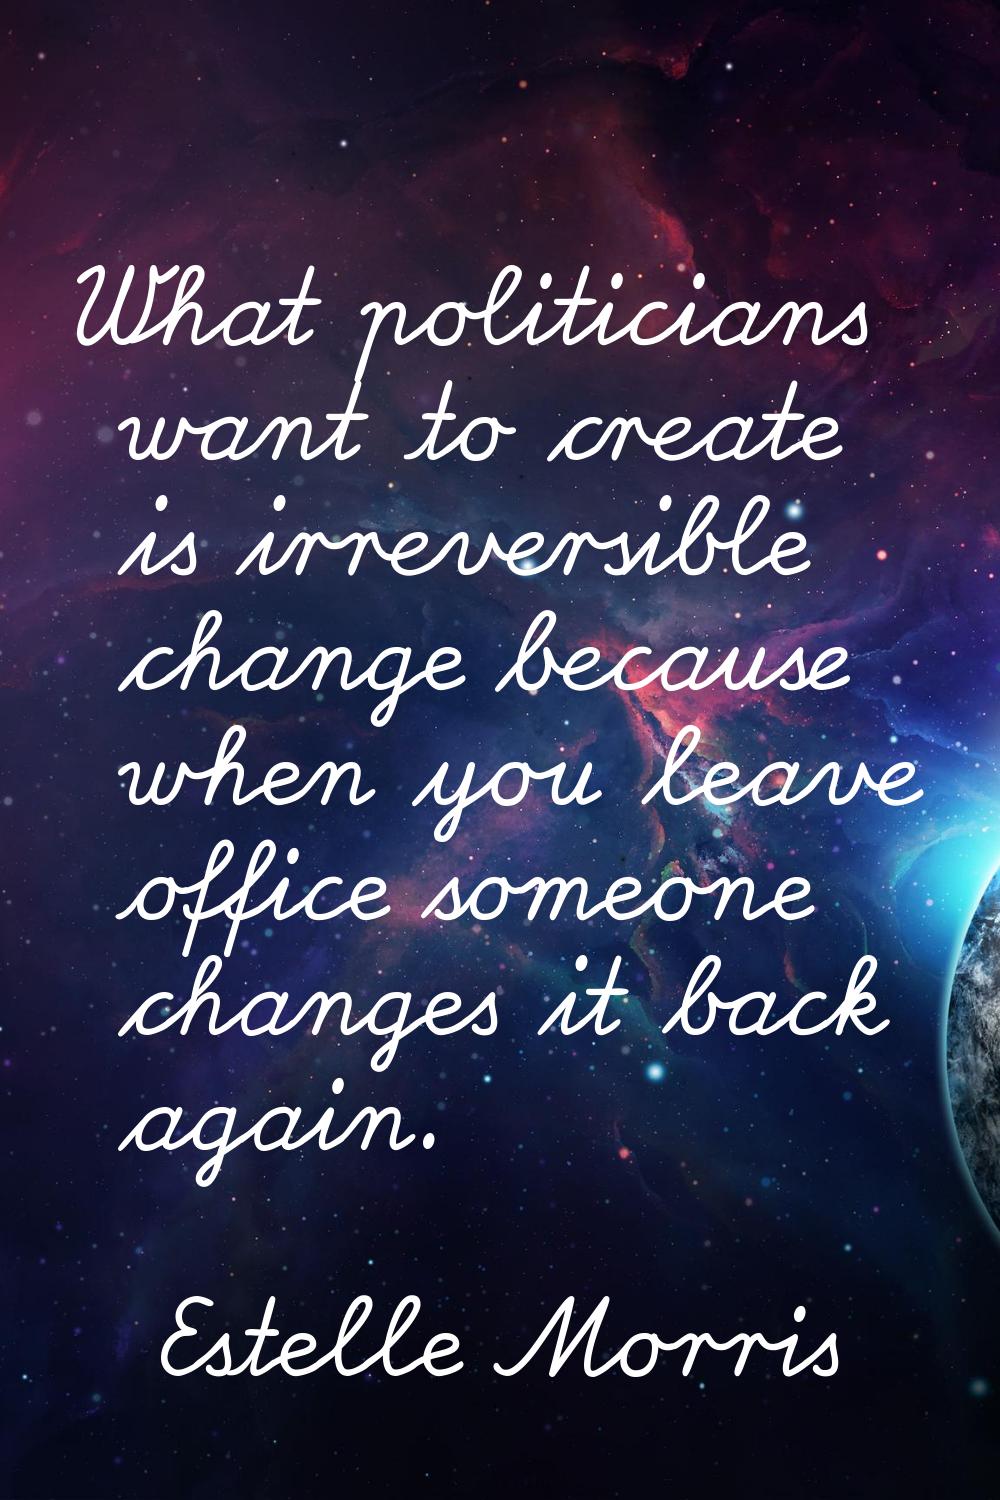 What politicians want to create is irreversible change because when you leave office someone change